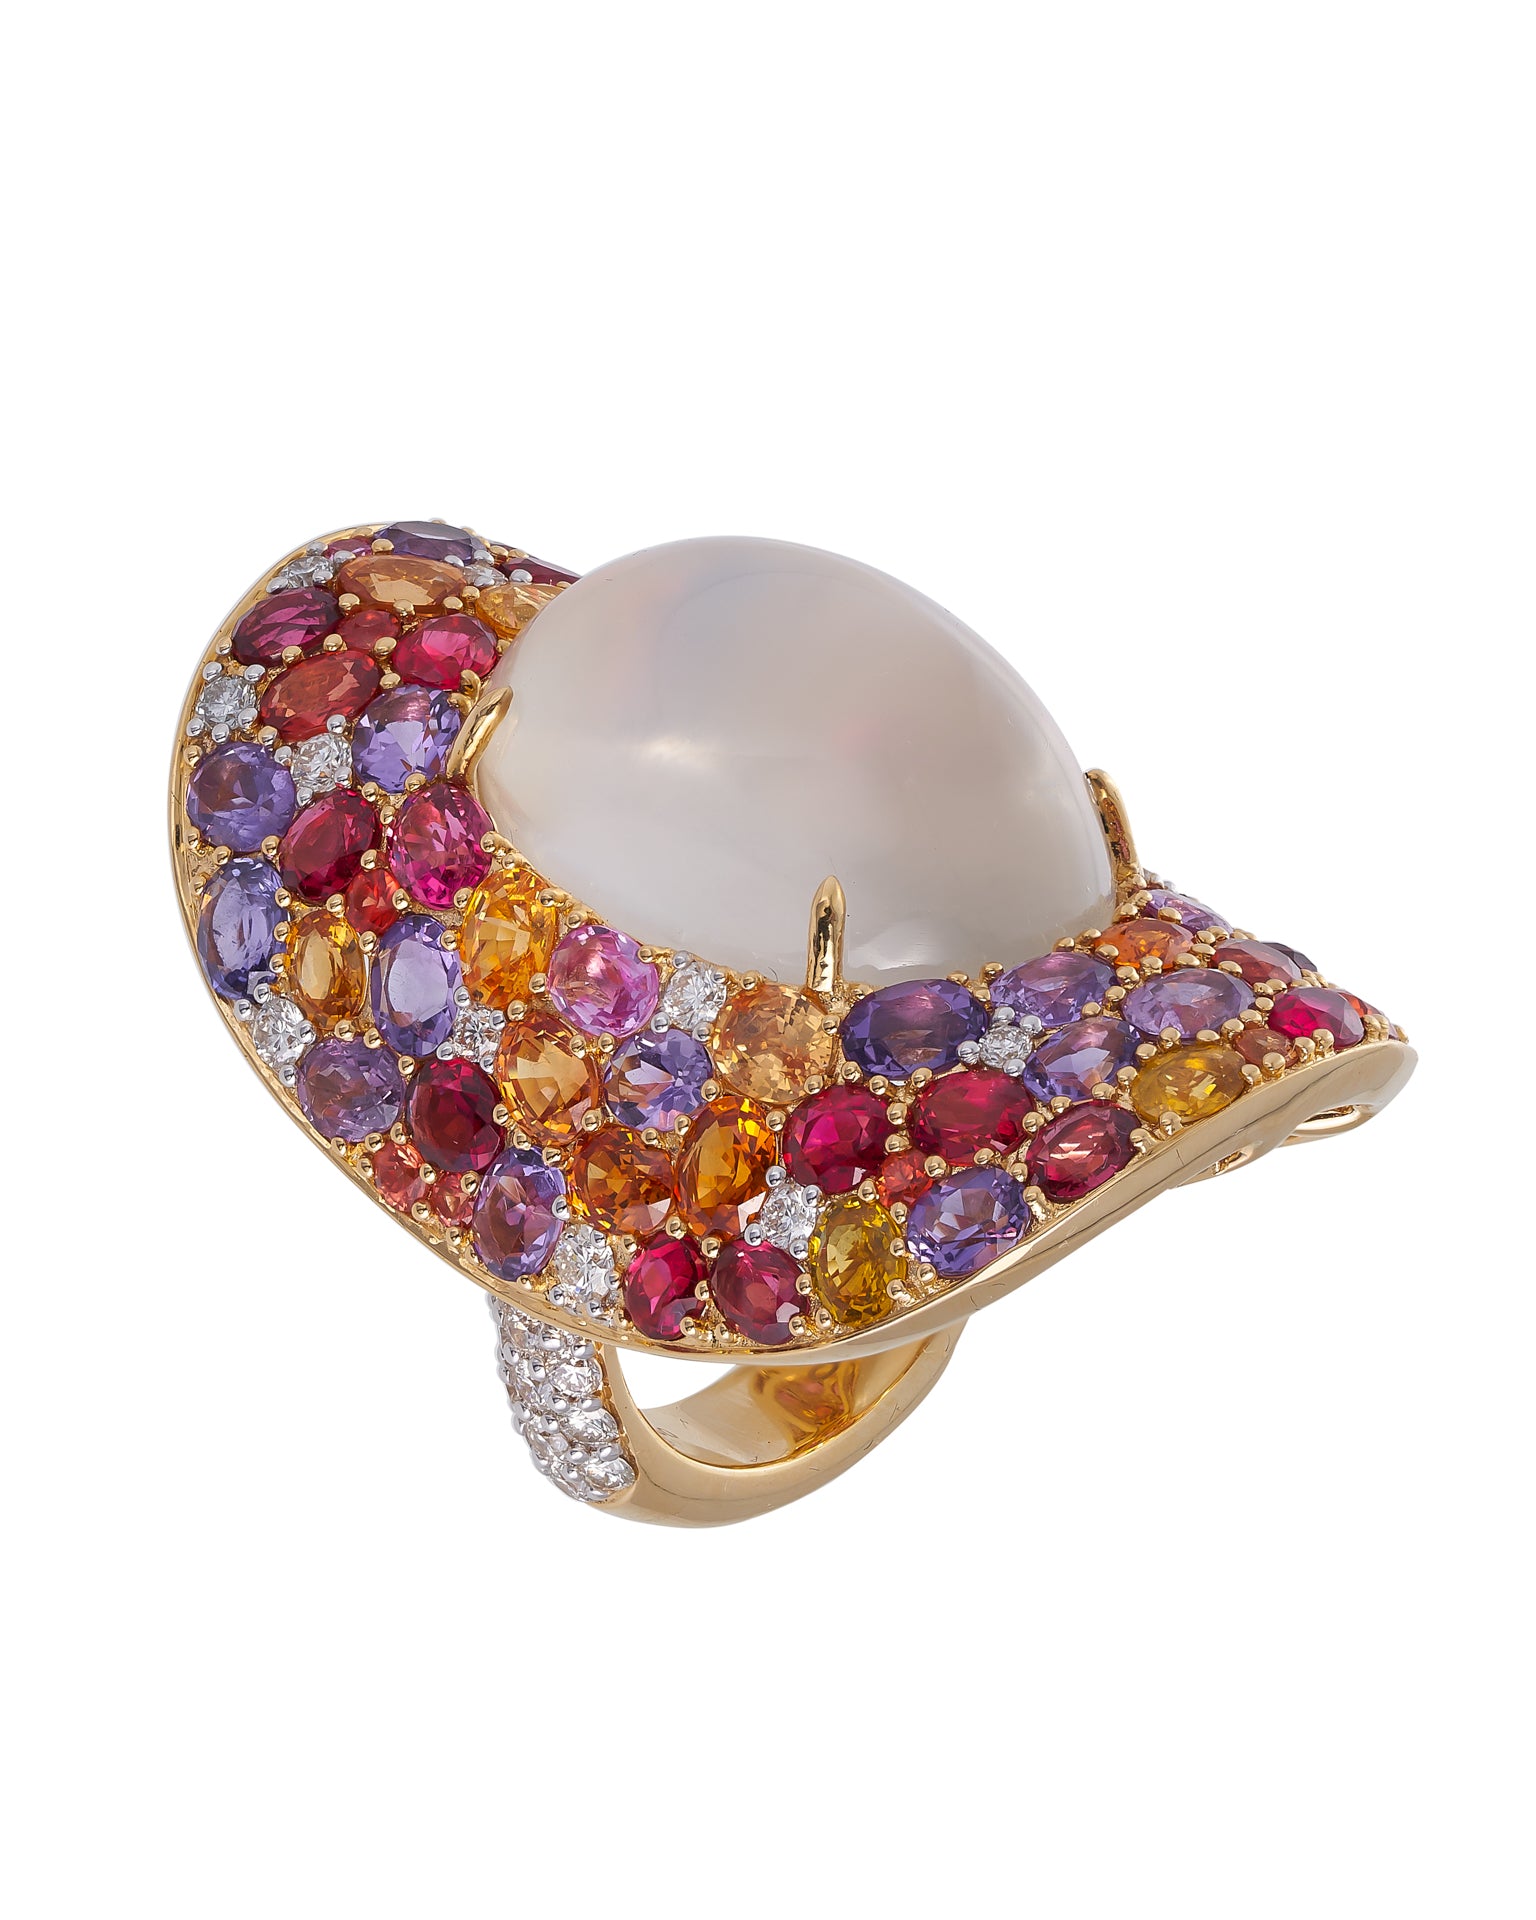 ‘Aura’ Moonstone Ring enhanced with diamonds and a myriad of gemstones, crafted in 18 karat yellow gold